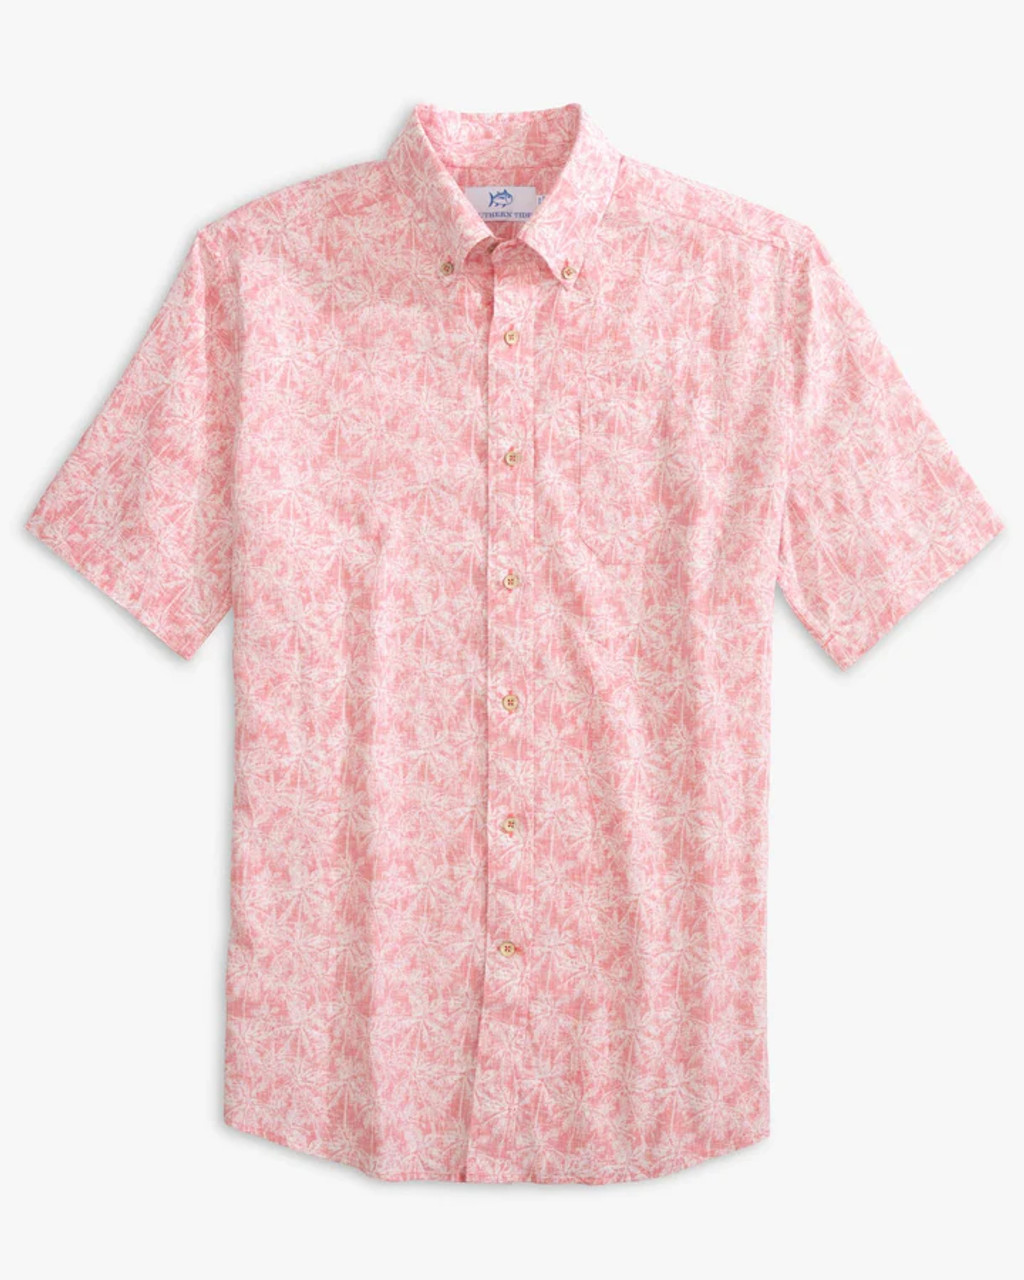 Men's Rayon Keep Palm and Carry On Print Sport Shirt